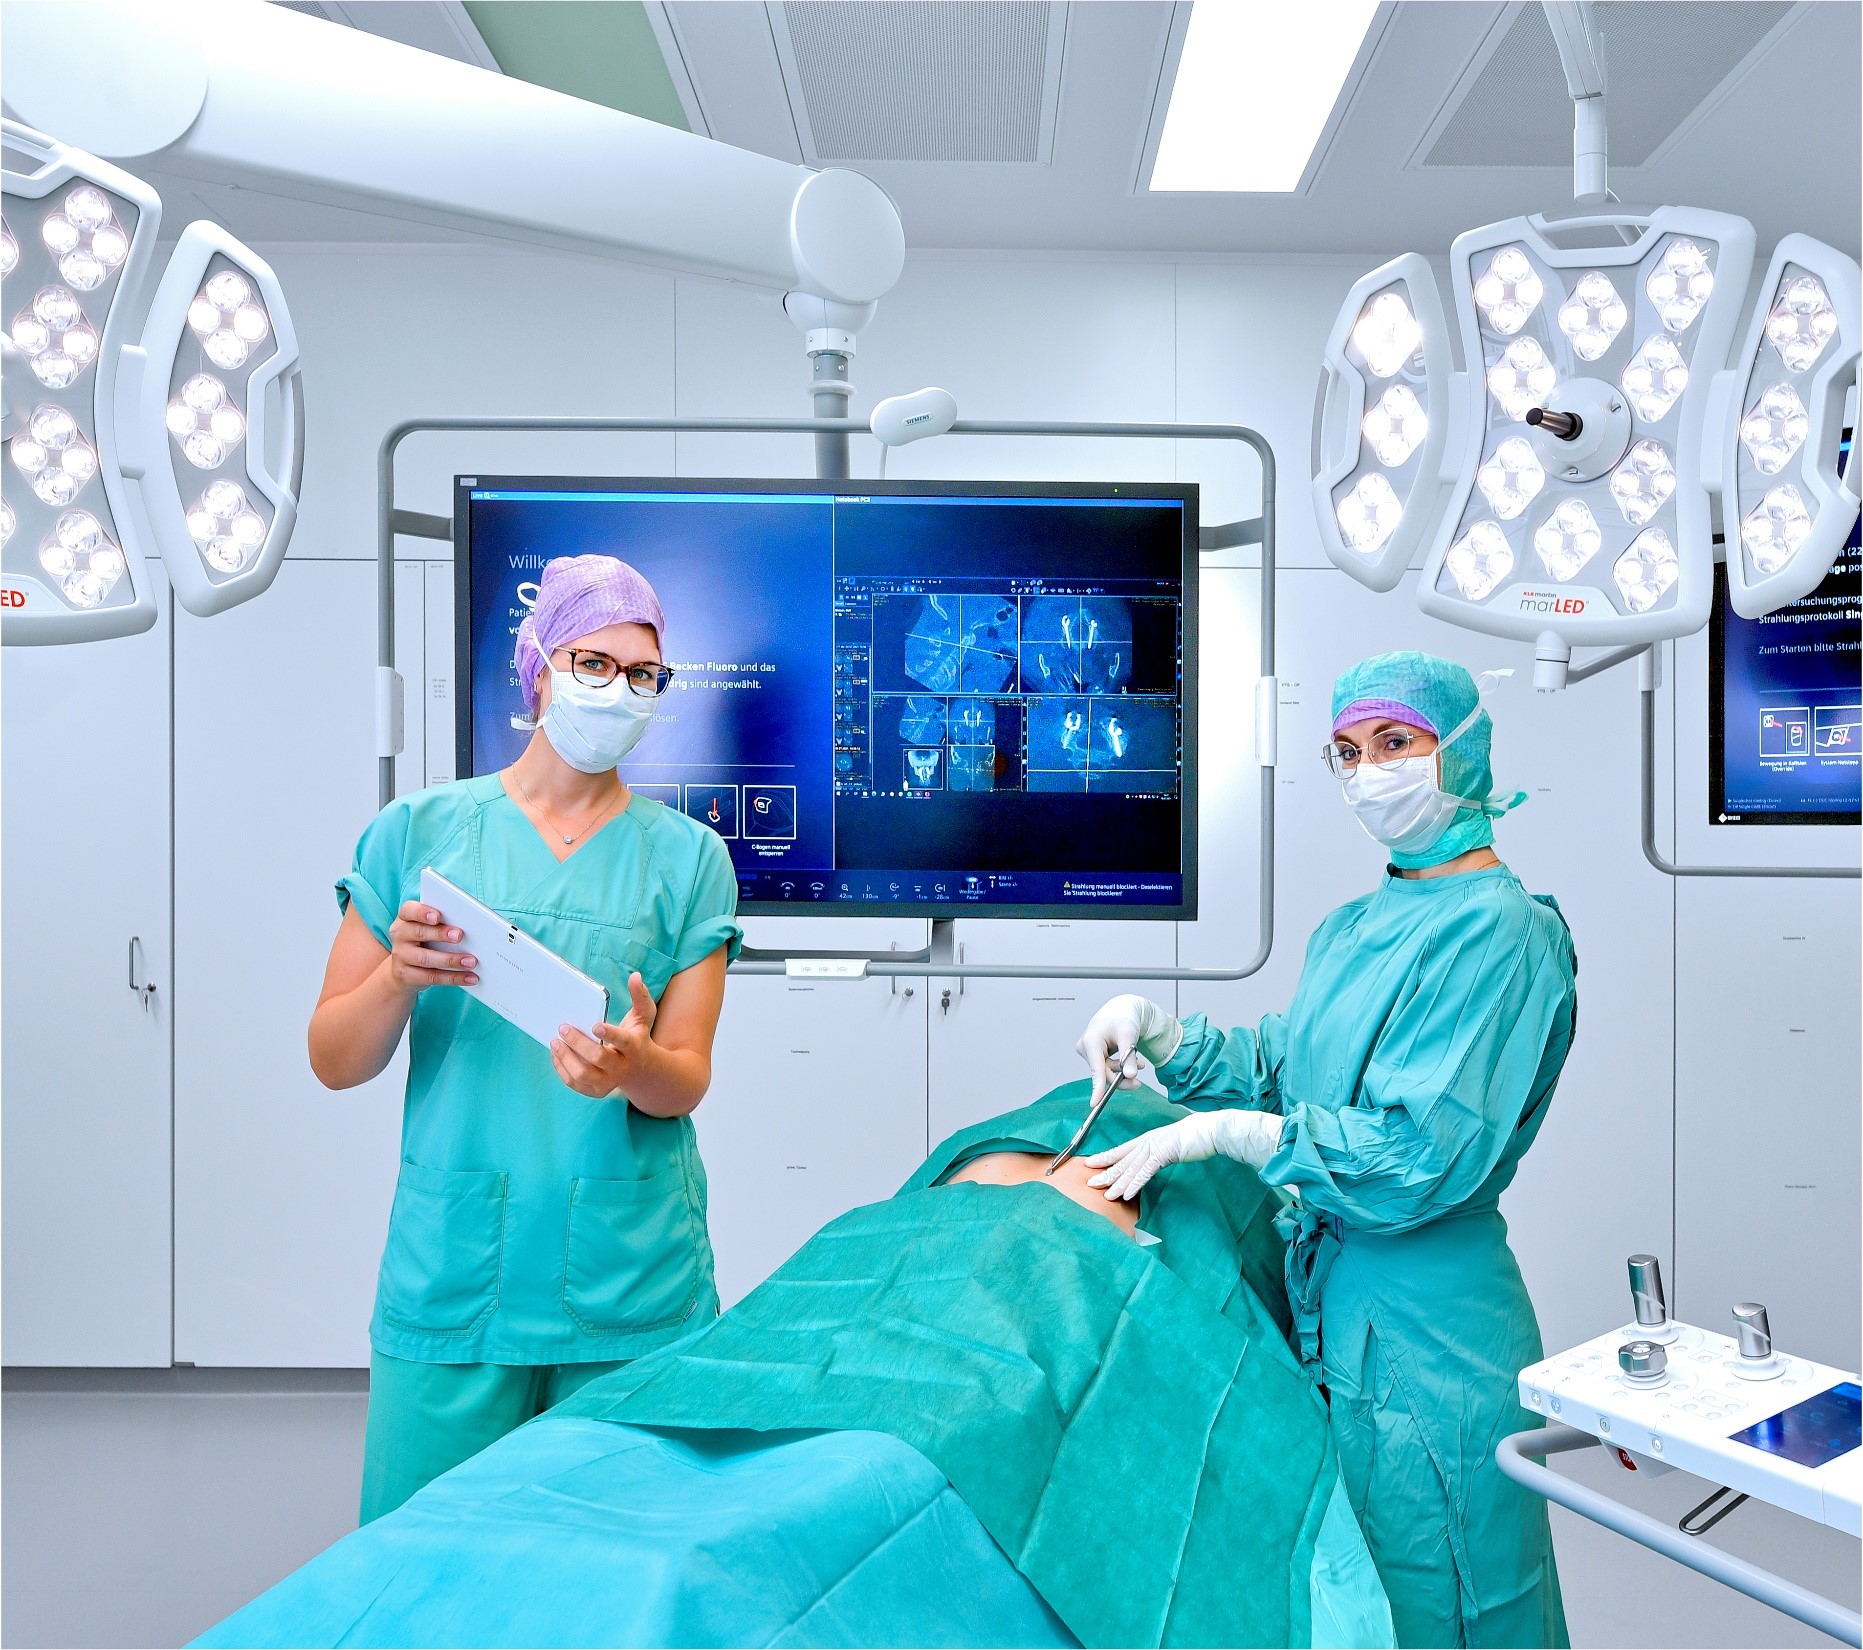 Two surgeons in operation room